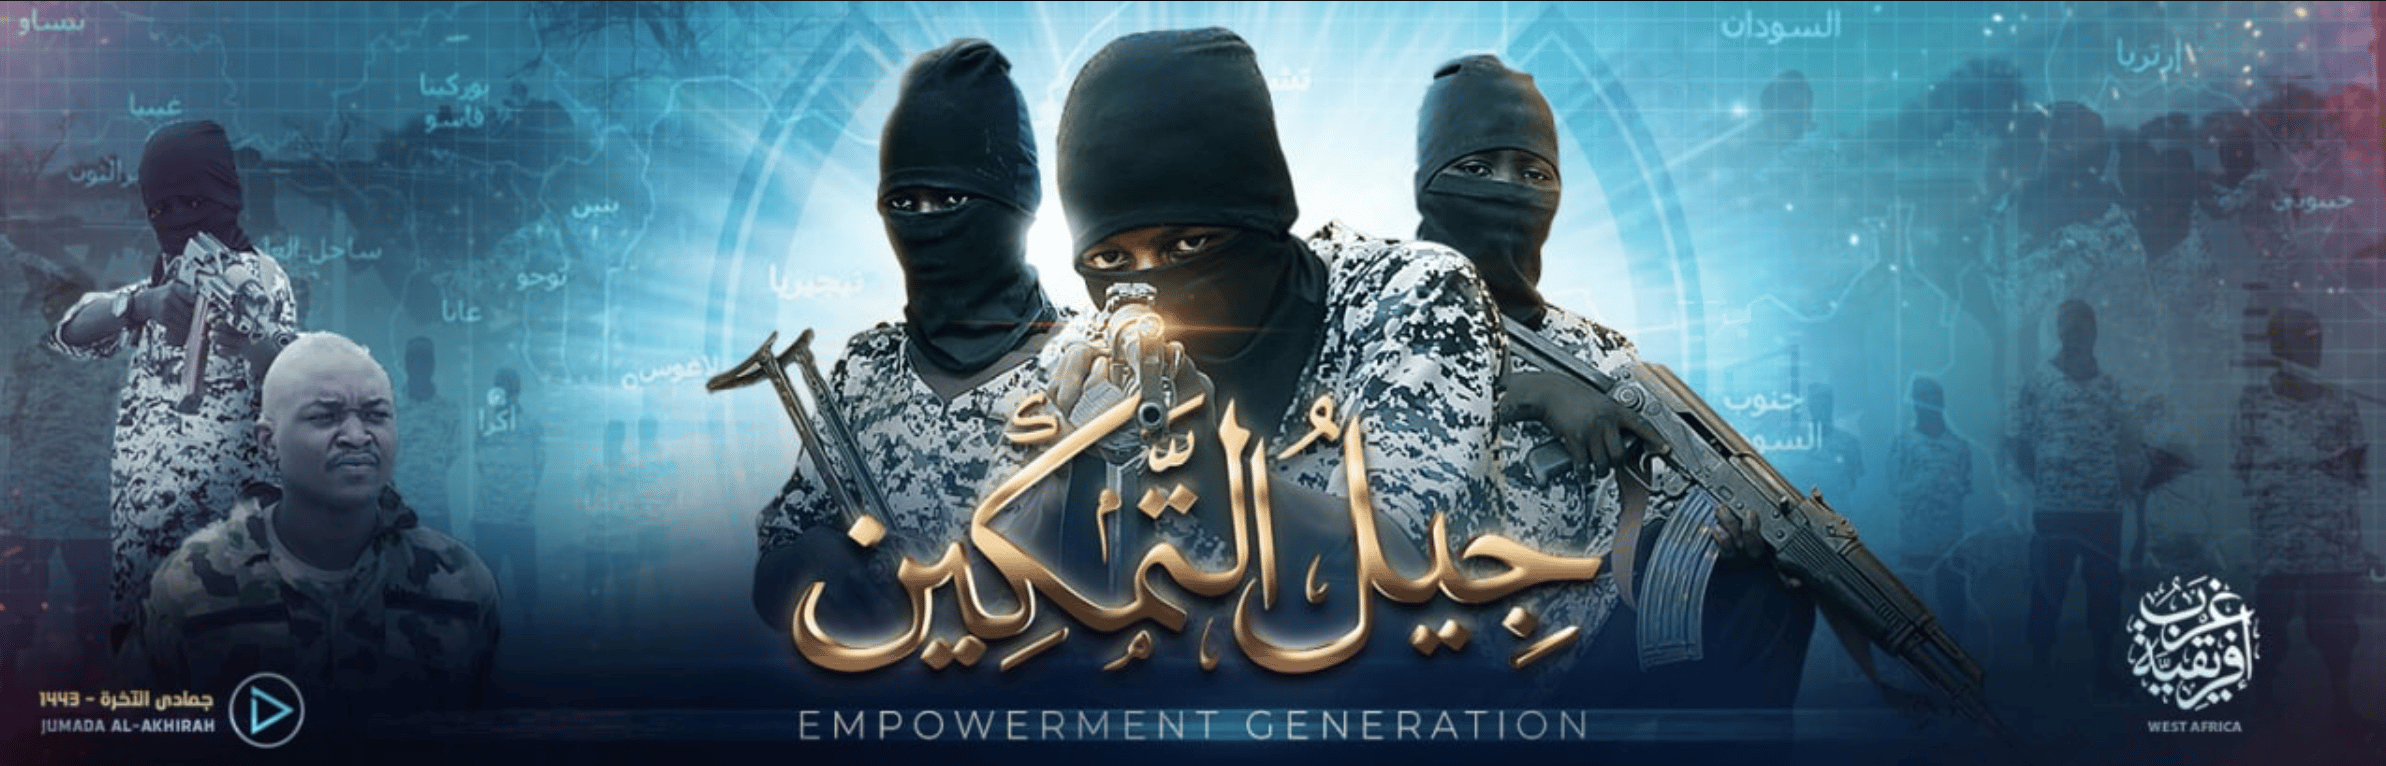 Islamic State West Africa (ISWA) "Empowerment Generation" Depicting Cub Training & Cub Executions - 18 January 2022